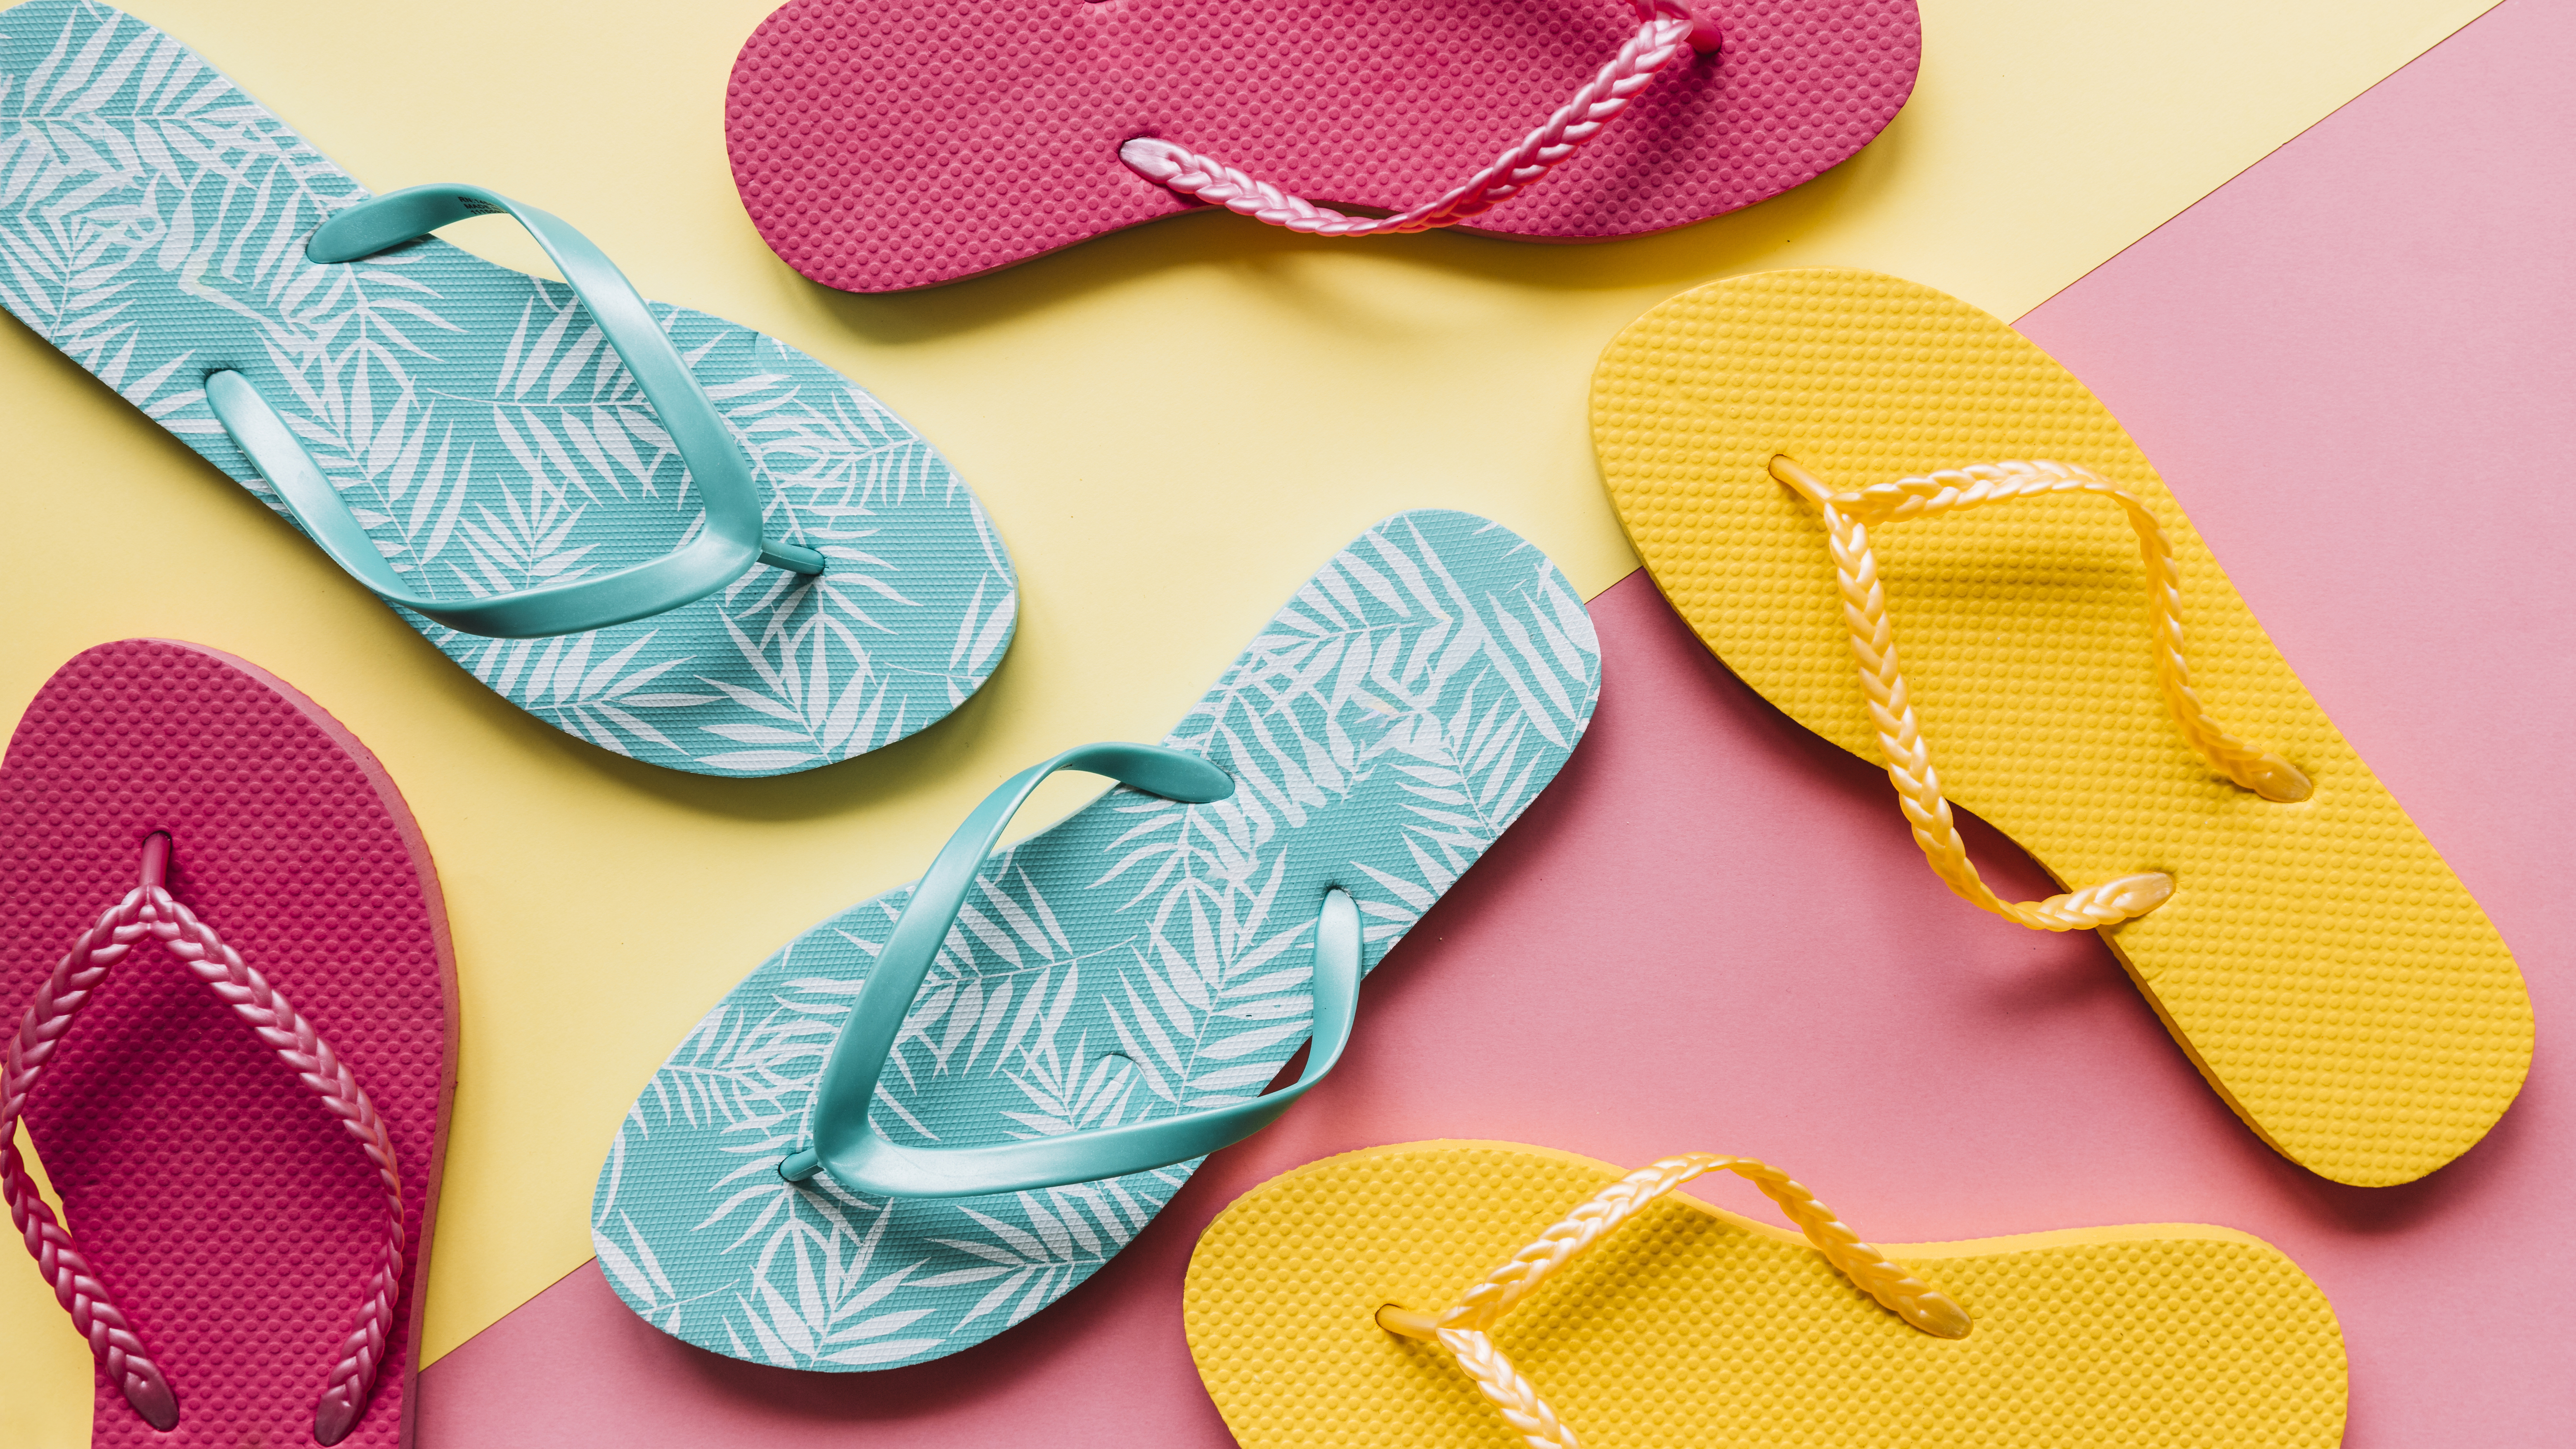 The slippers become smaller after being exposed to the sun, can they return to their original shape?